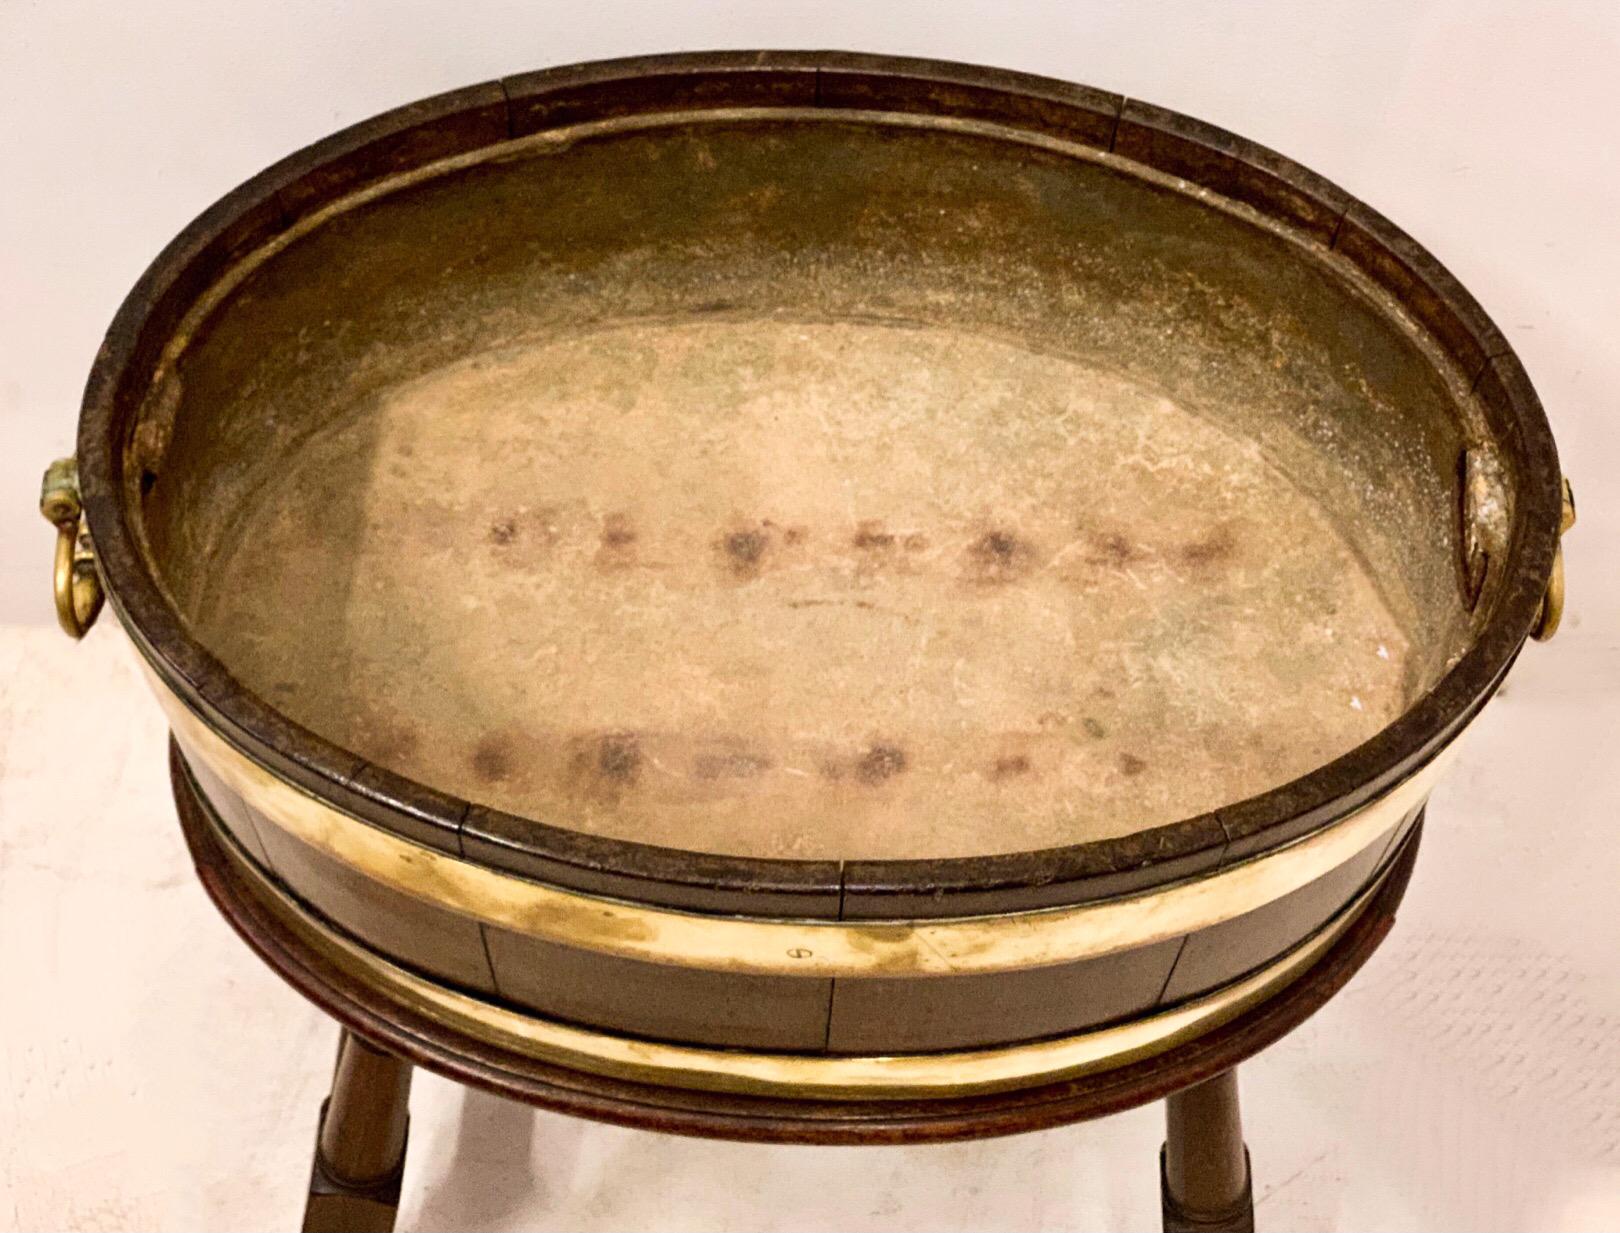 This is a wonderful antique English brass bound cellarette. It is hand hewn peg construction. It has the original zinc liner. The bucket portion is removable from the base. The base has turned legs. Overall, it is in very good antique condition.